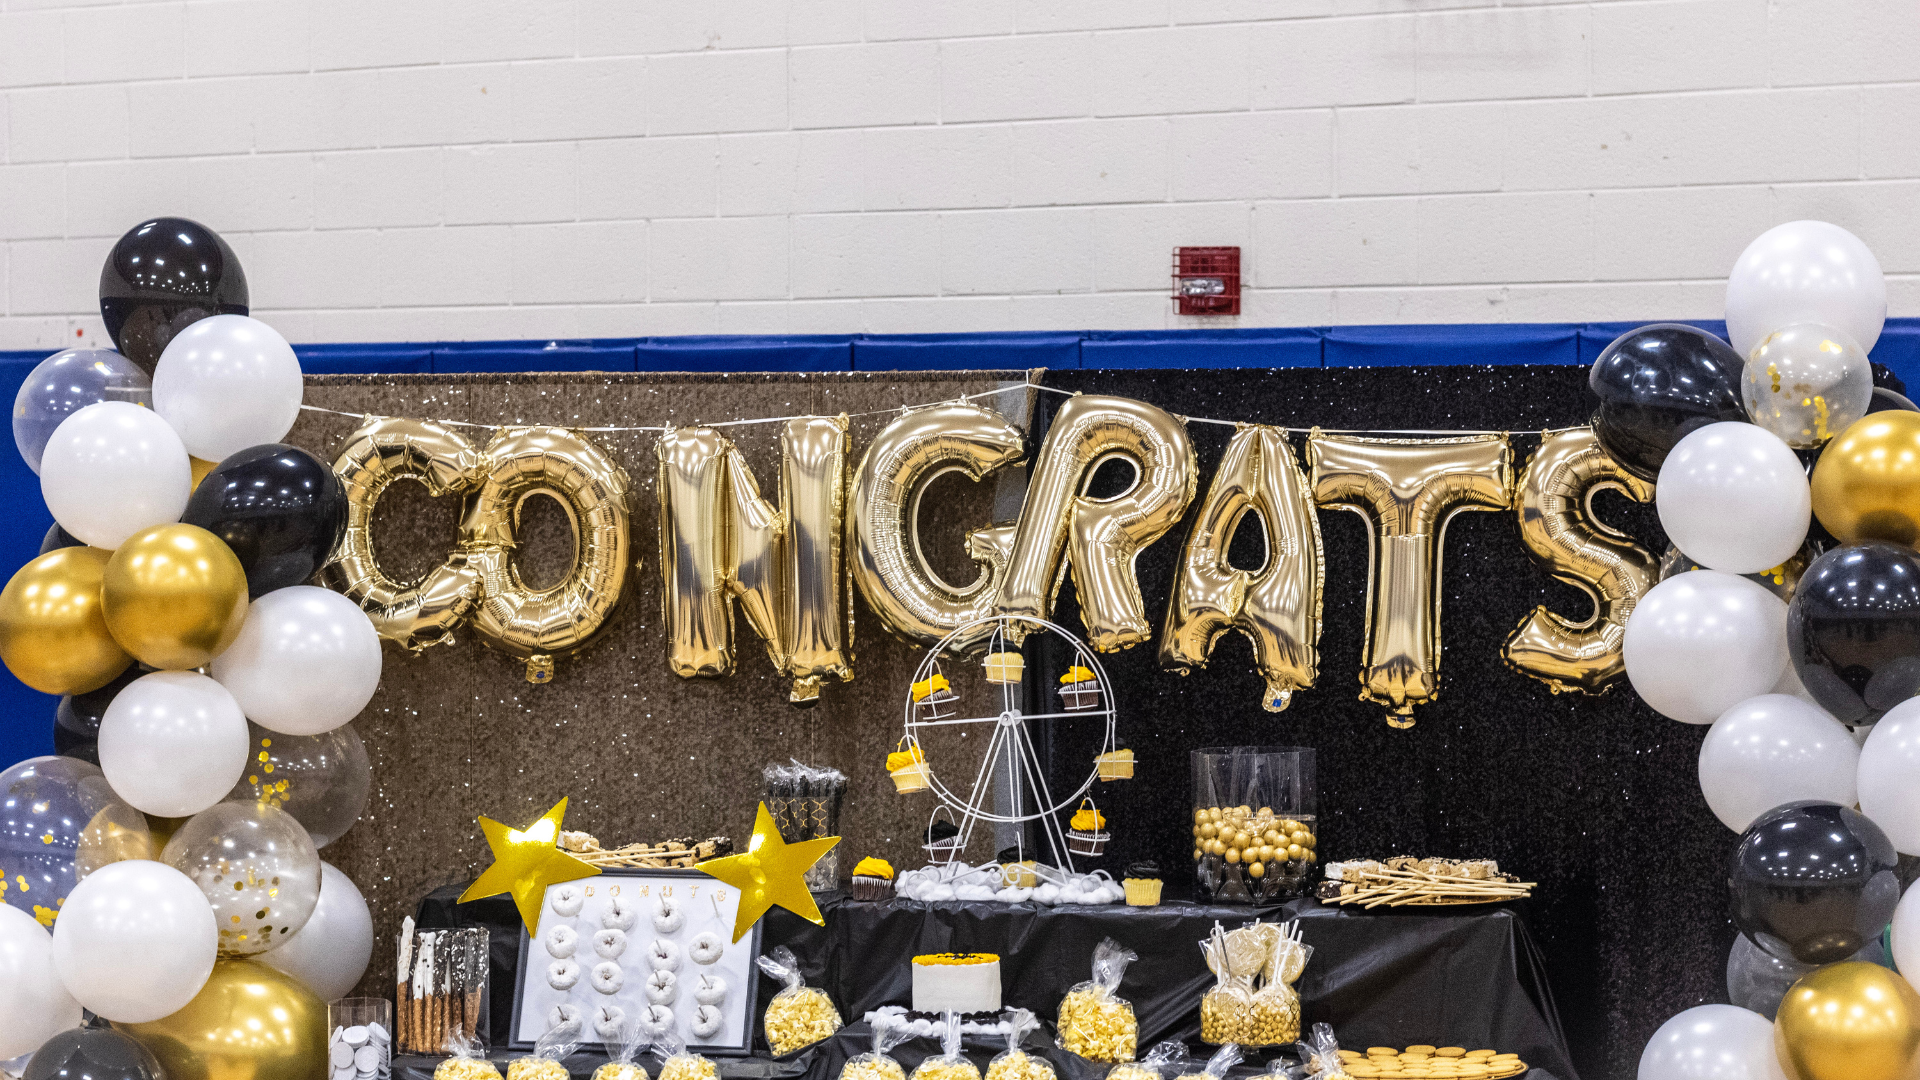 A table decorated with balloons and a sign that says `` congrats ''.